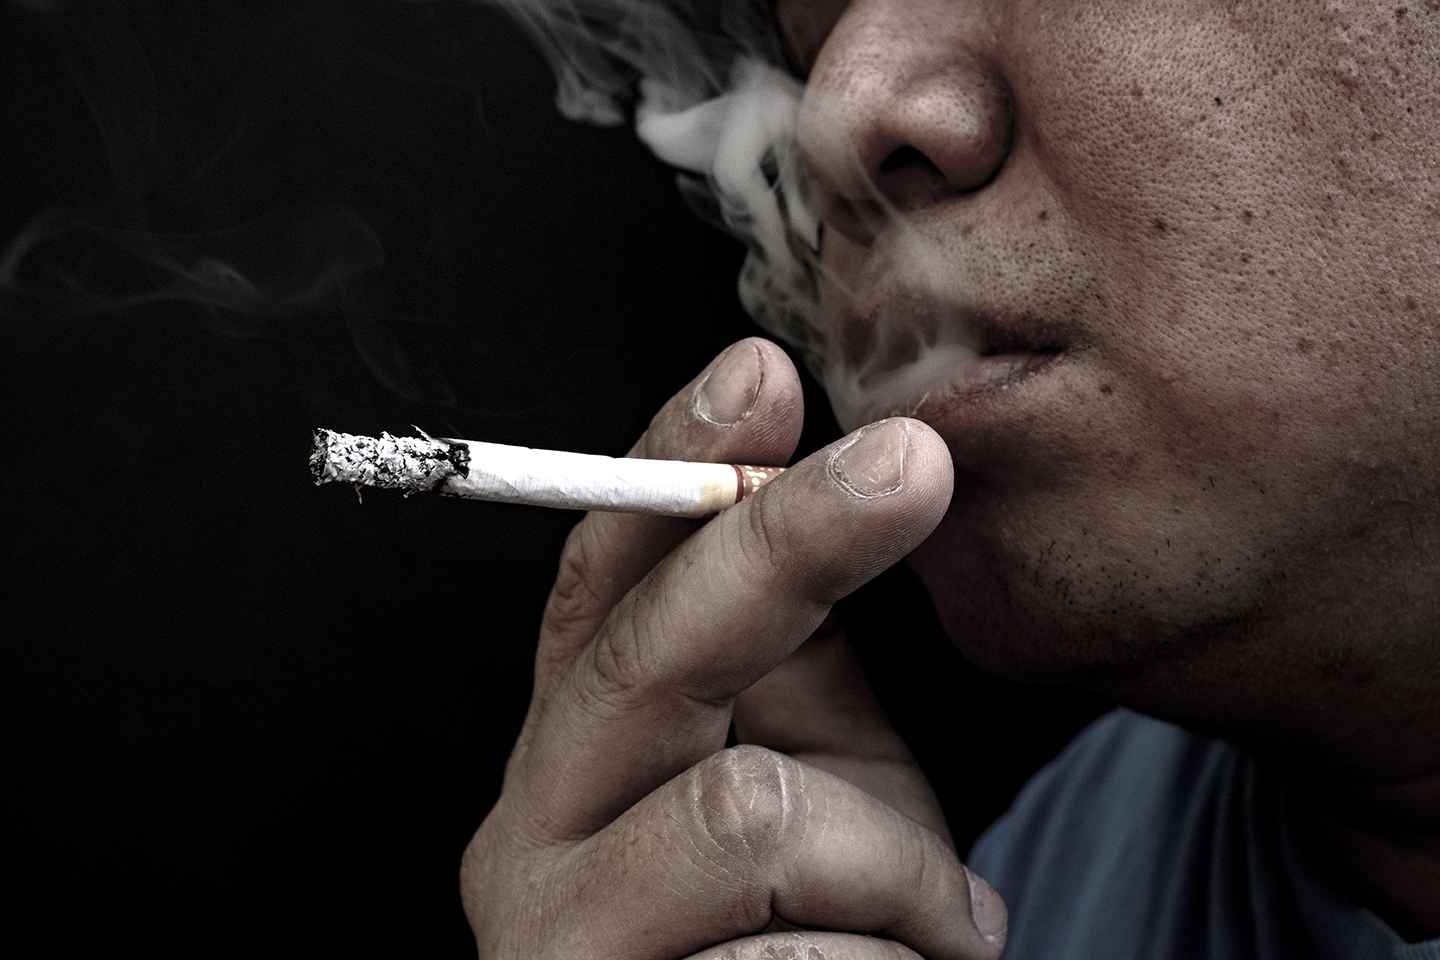 Man smoking a cigarette, Image of cigarette in hand with smoke